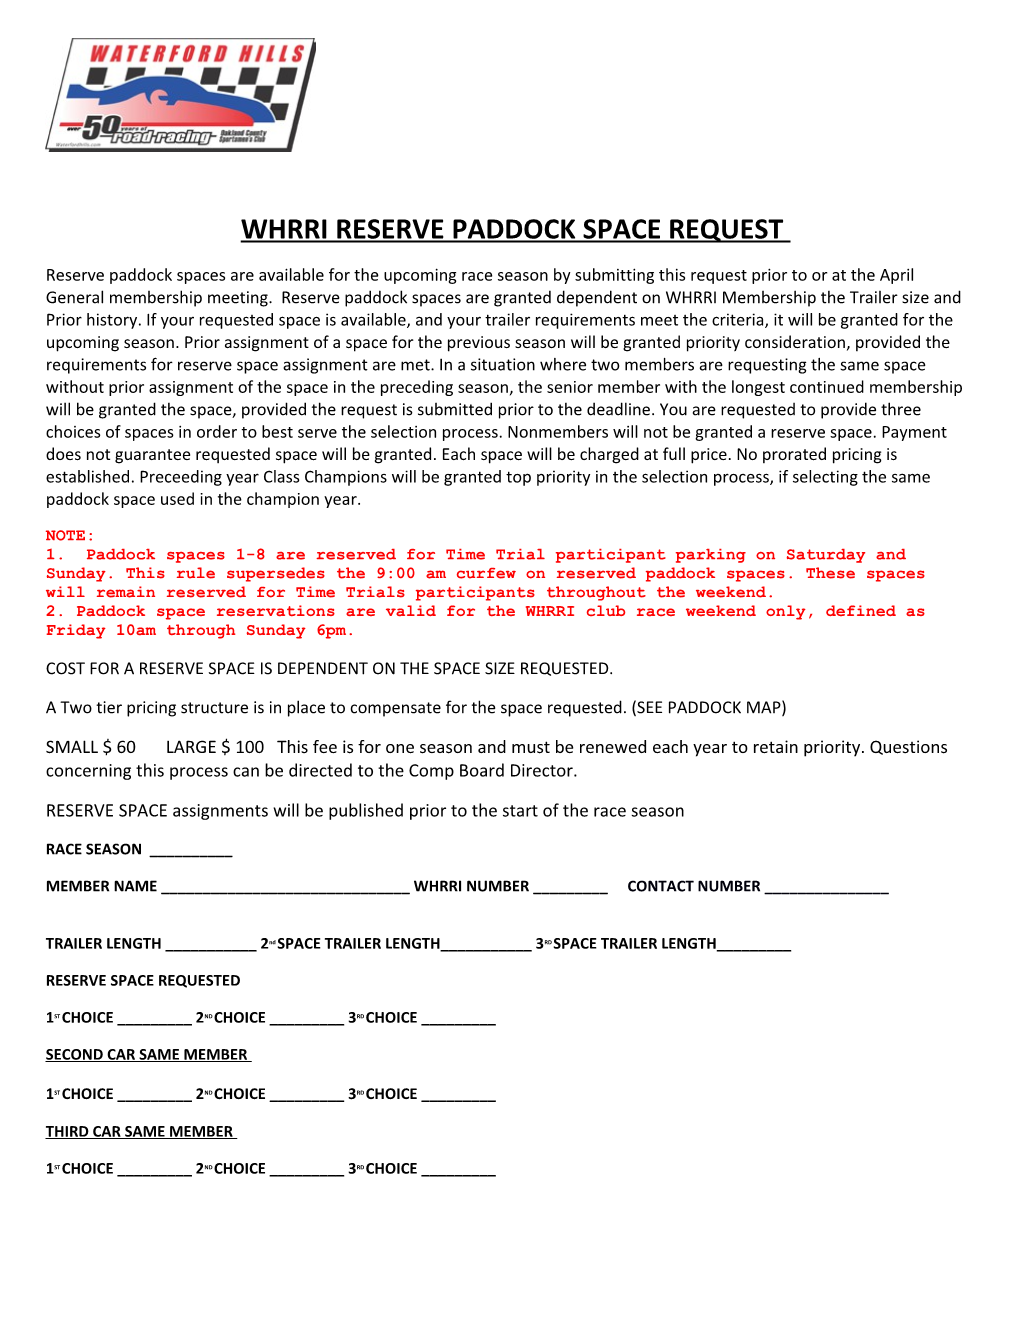 Whrri Reserve Paddock Space Request